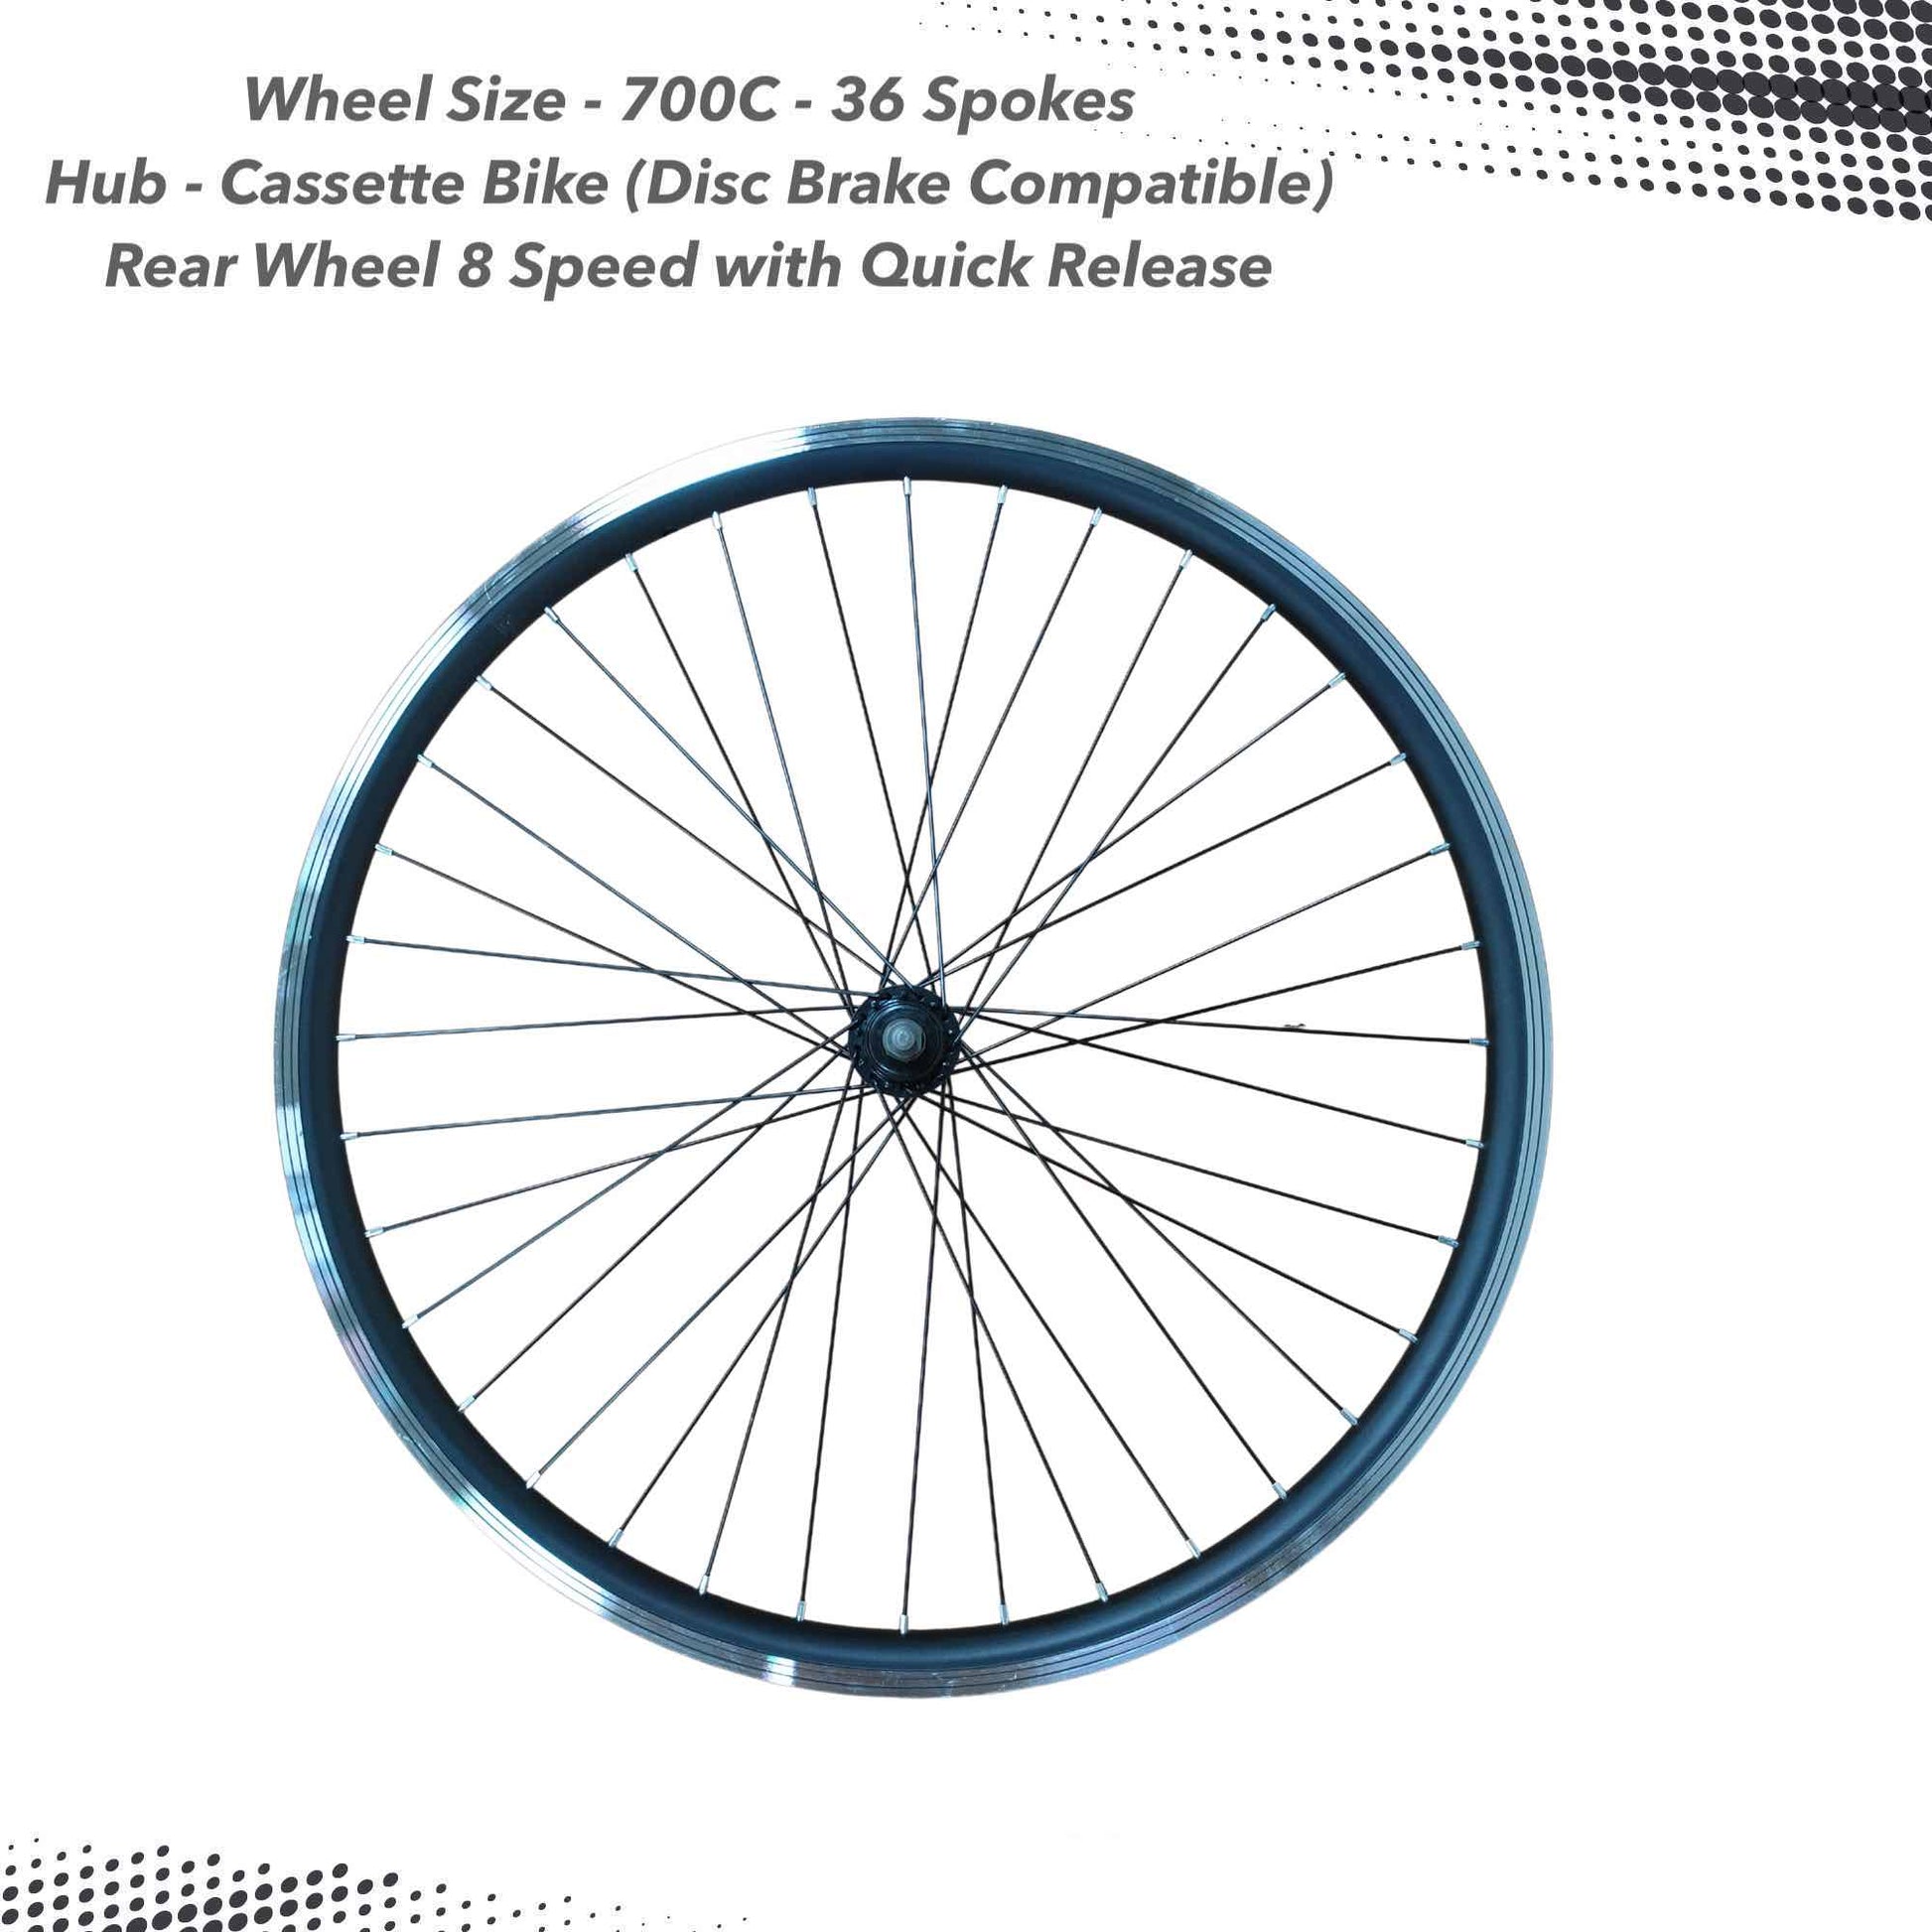 700c Black rims spare part available online on omobikes